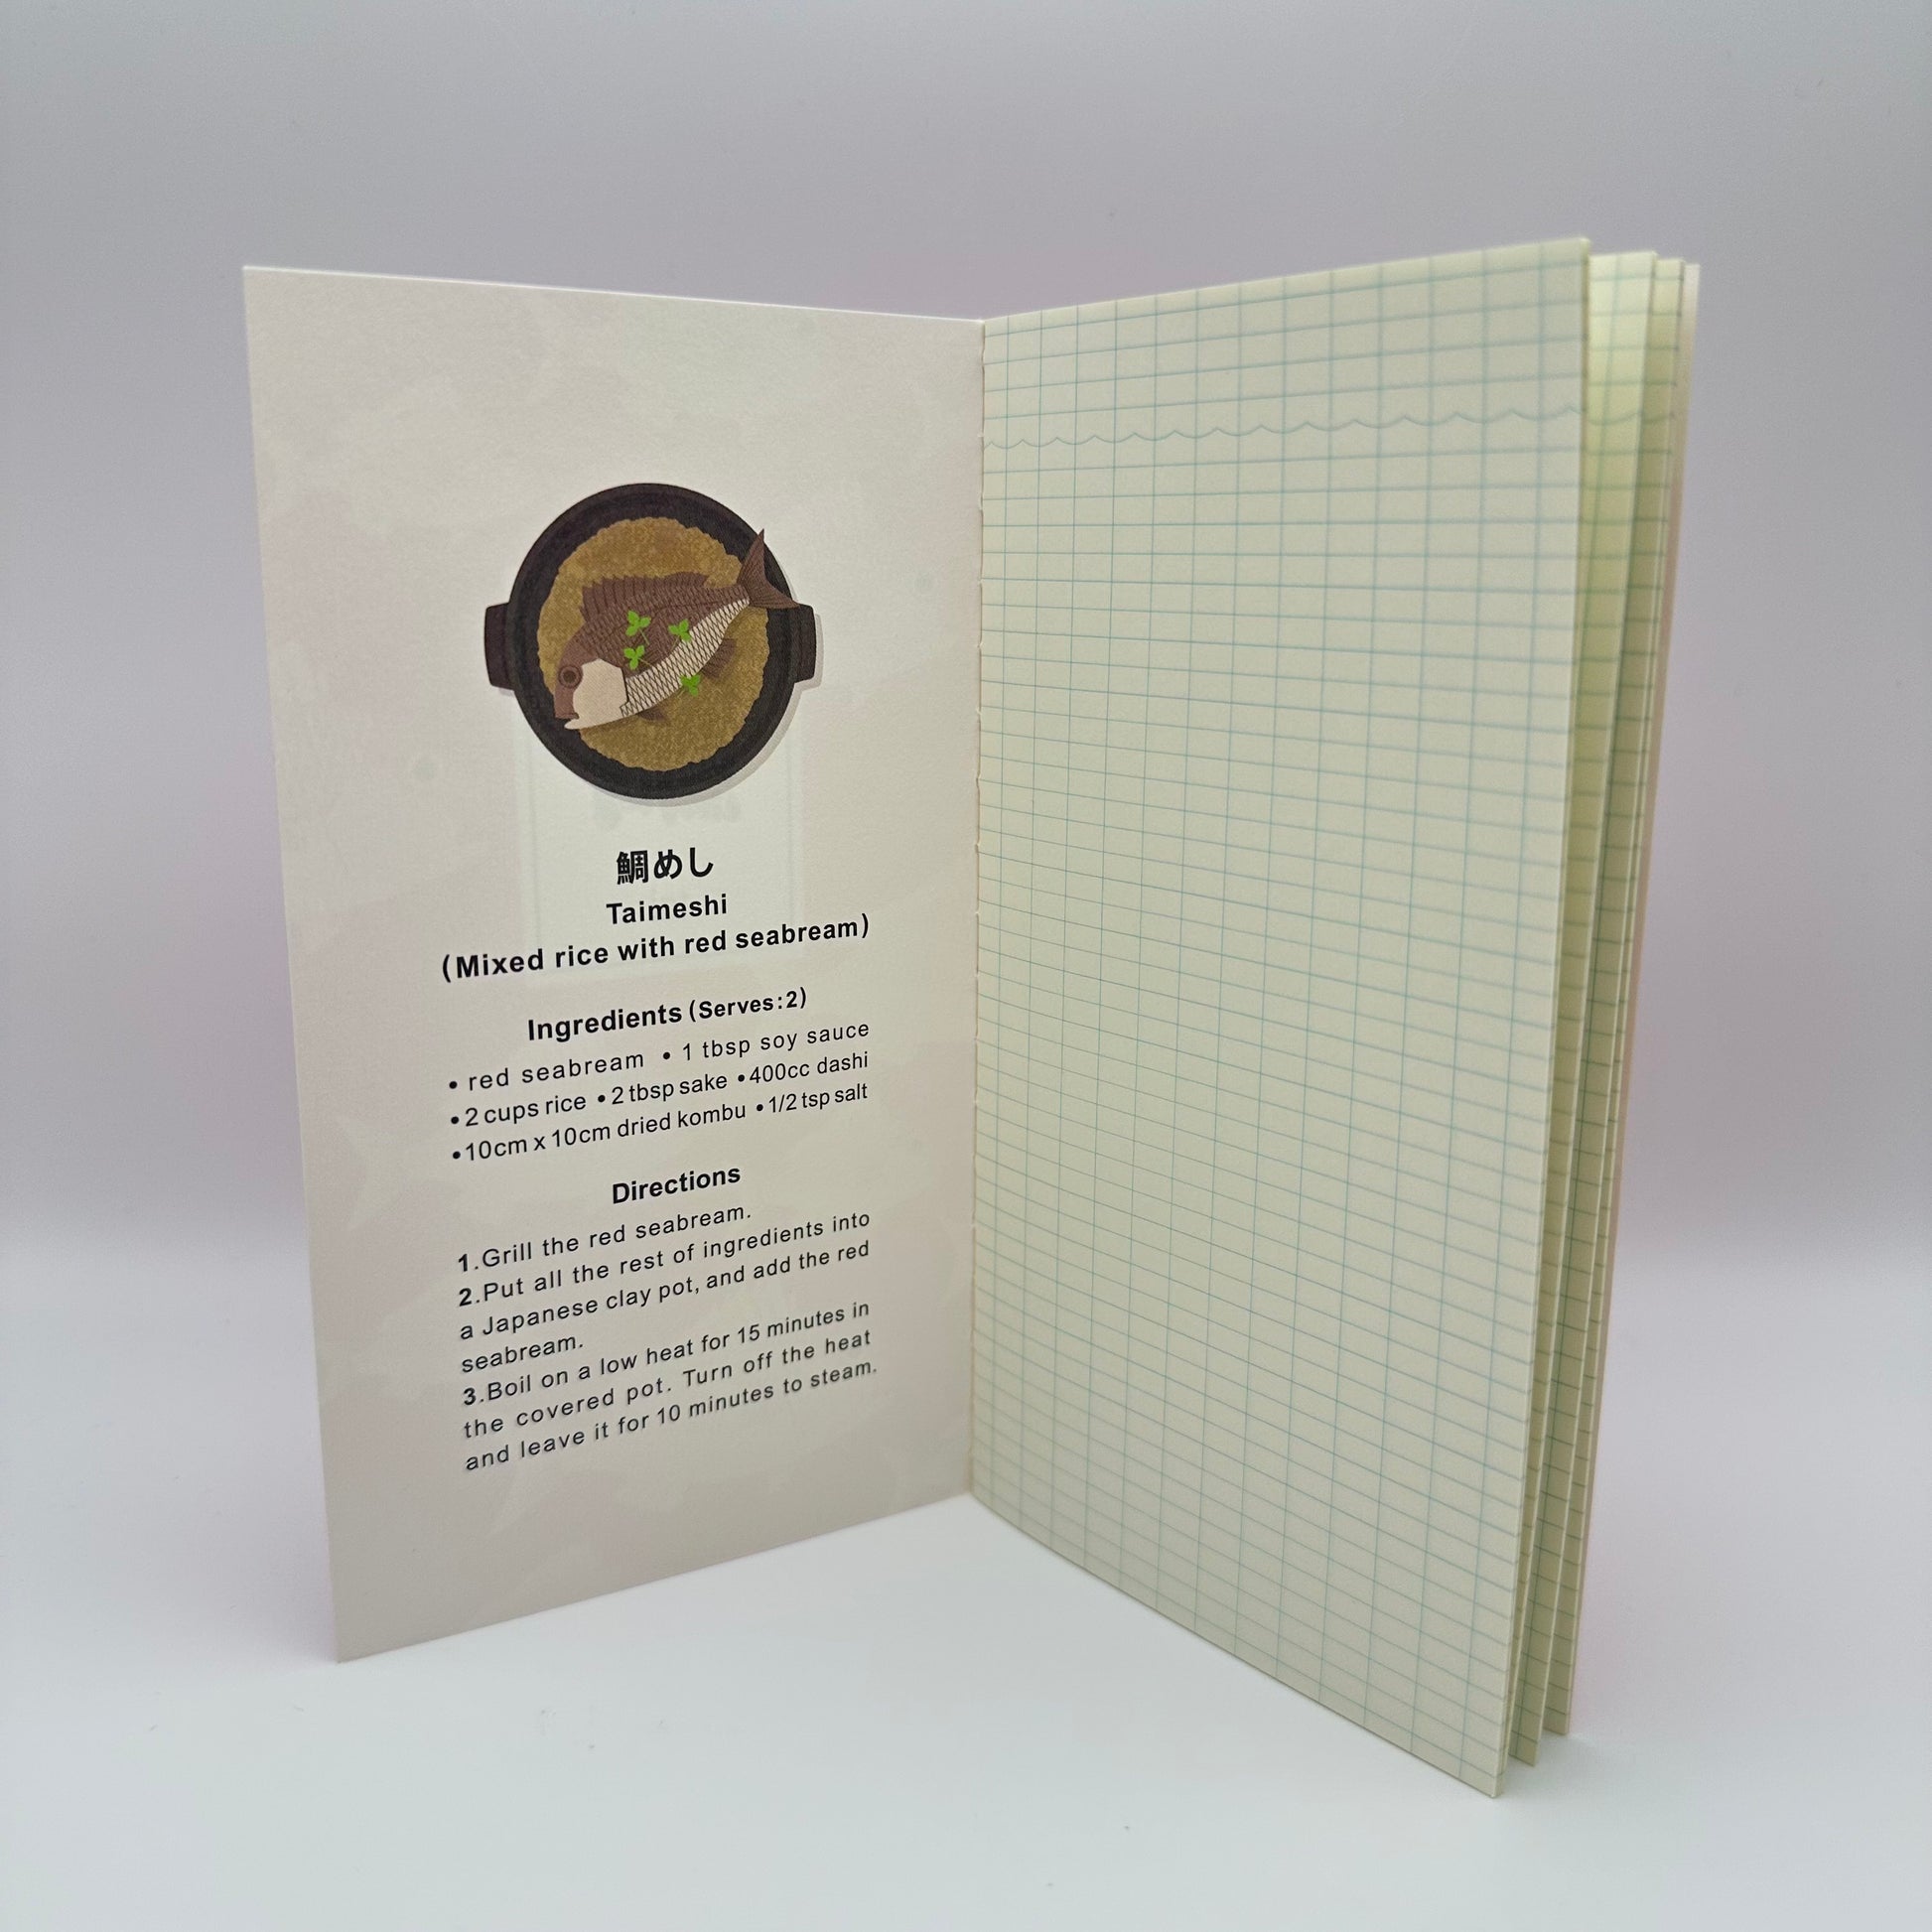 Notebook open to reveal the inside cover which shows a recipe using red seabream fish. The pages are grid.